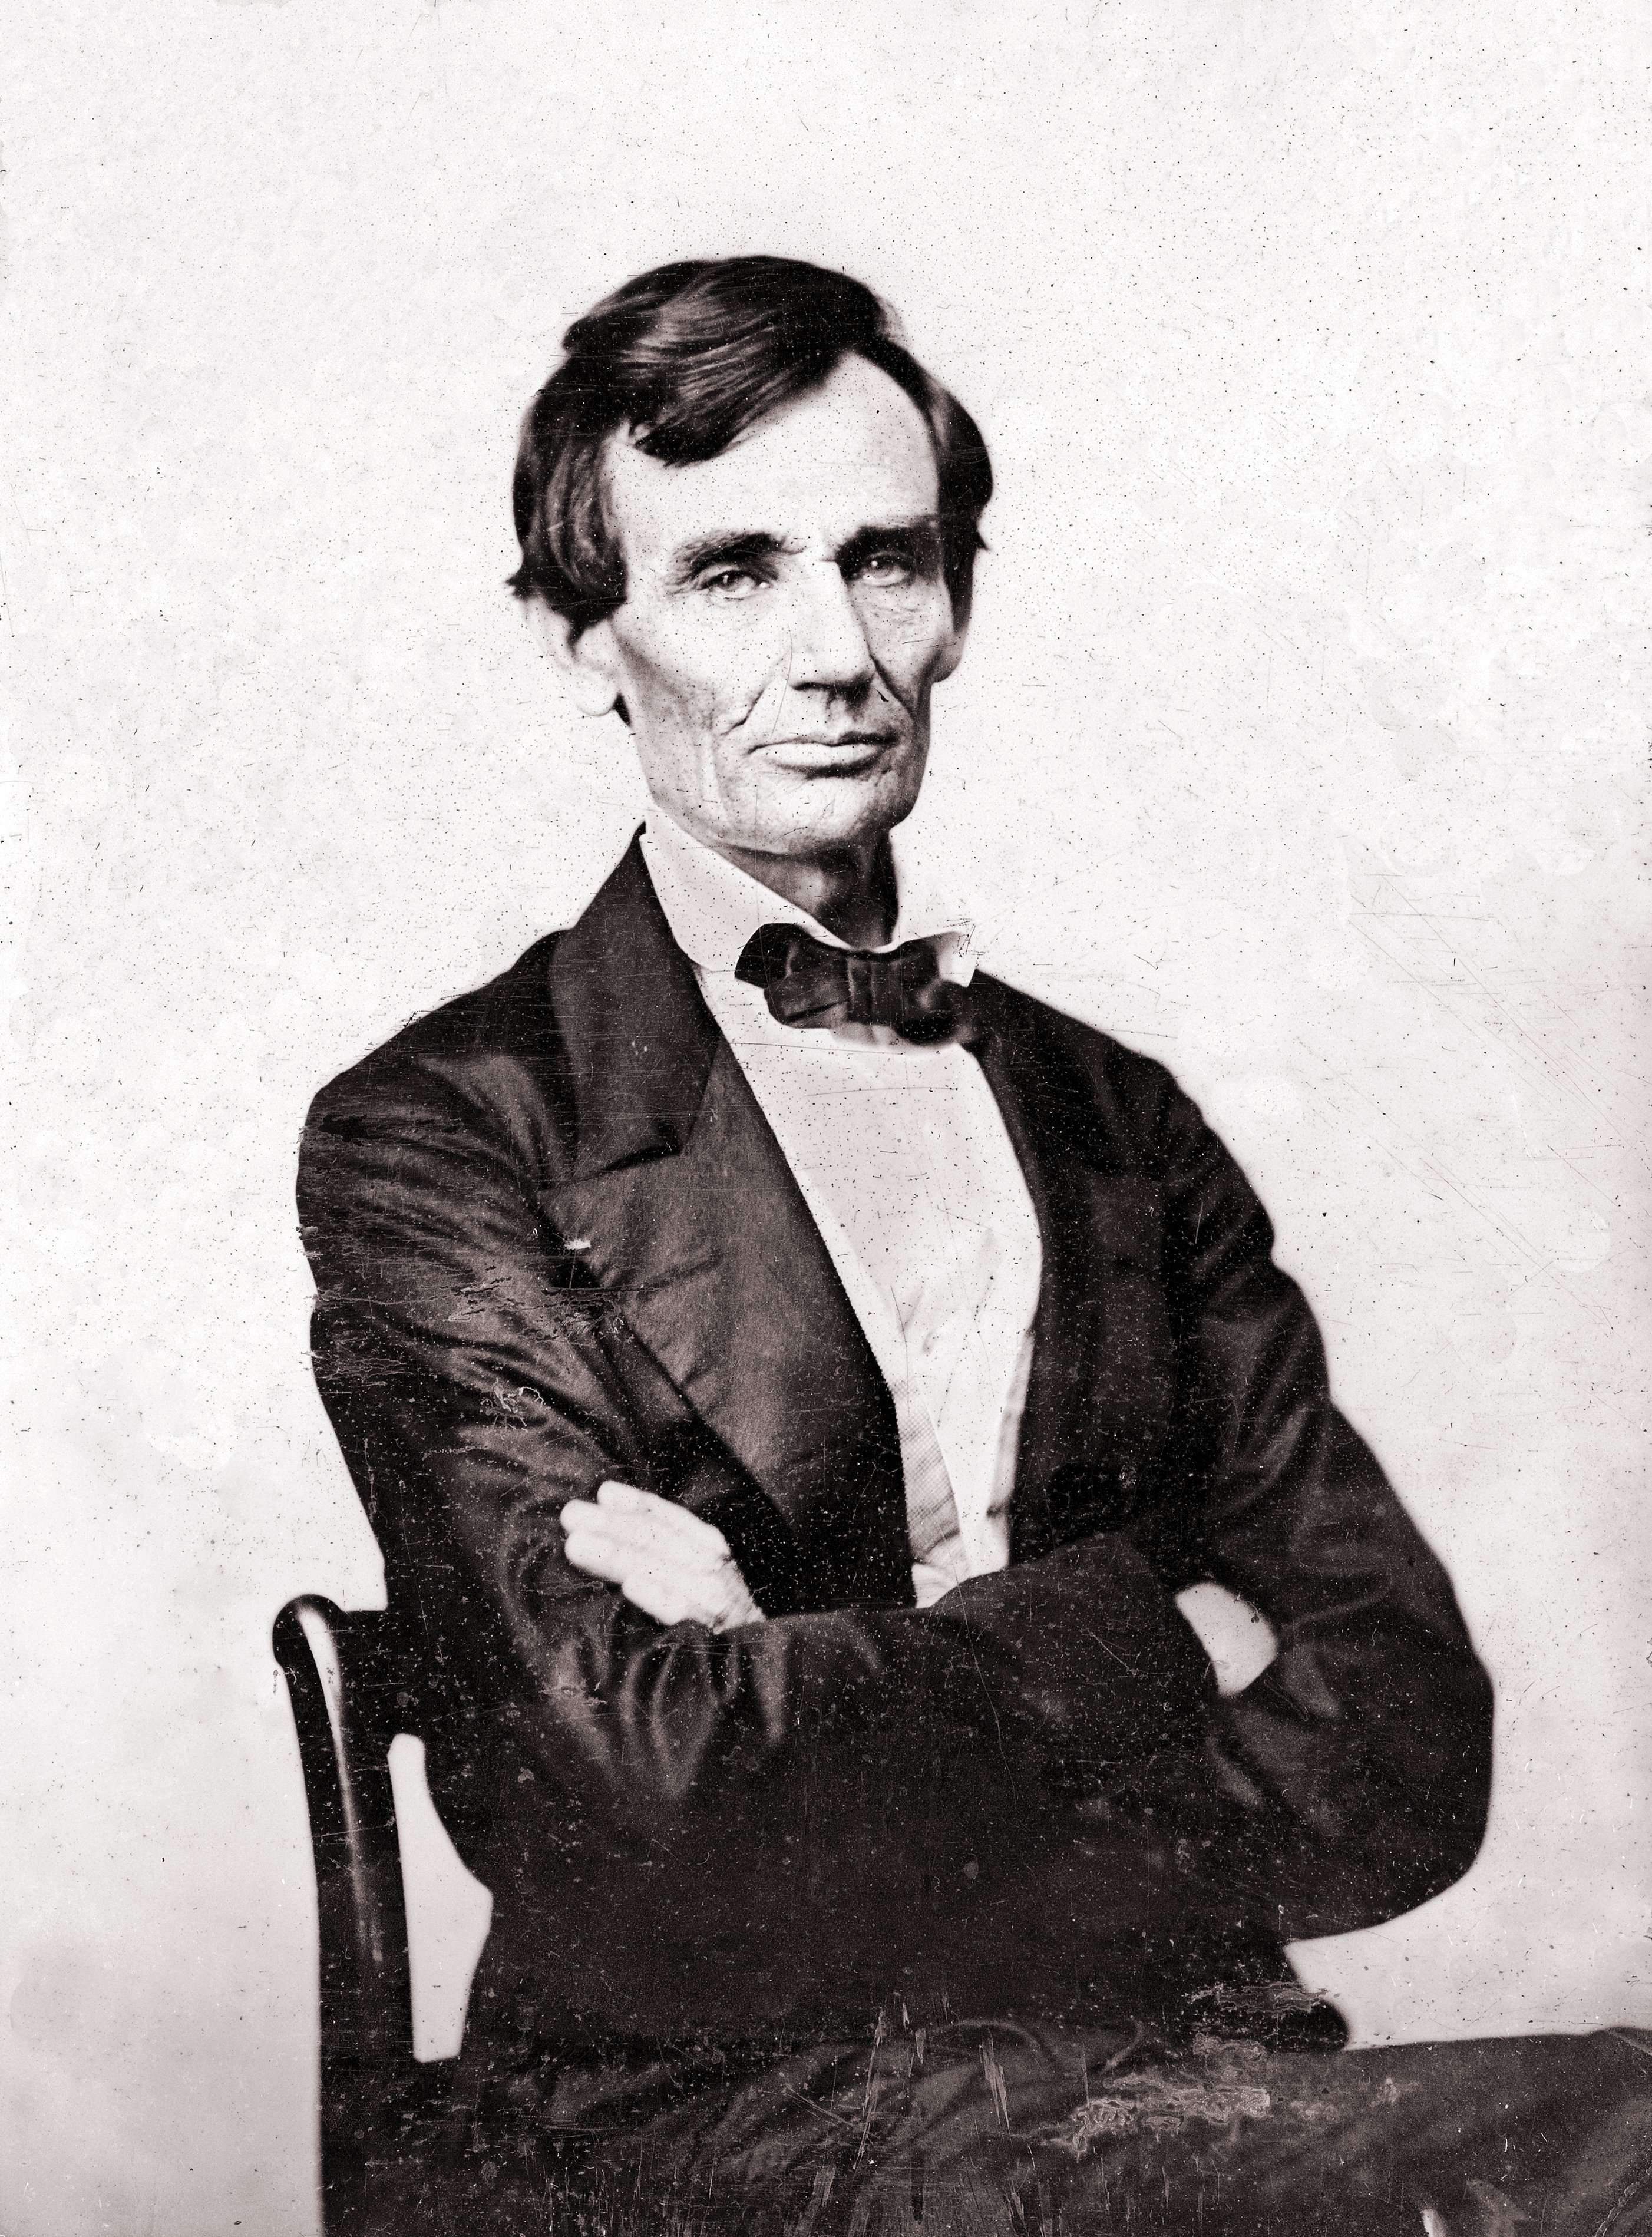 FileAbraham Lincoln O36 by Butler, 1860crop.jpg Wikimedia Commons